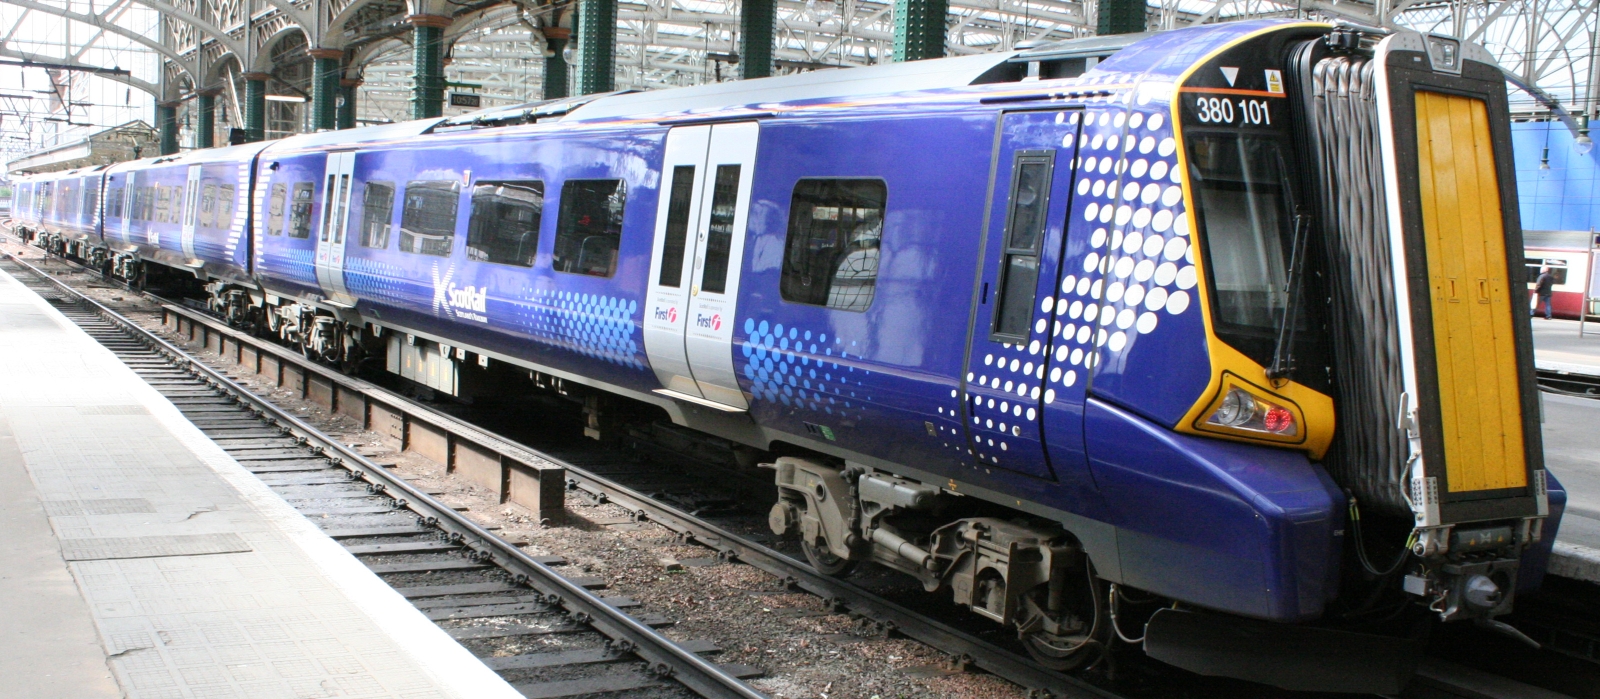 380 101 operated by First ScotRail in Glasgow in 2011